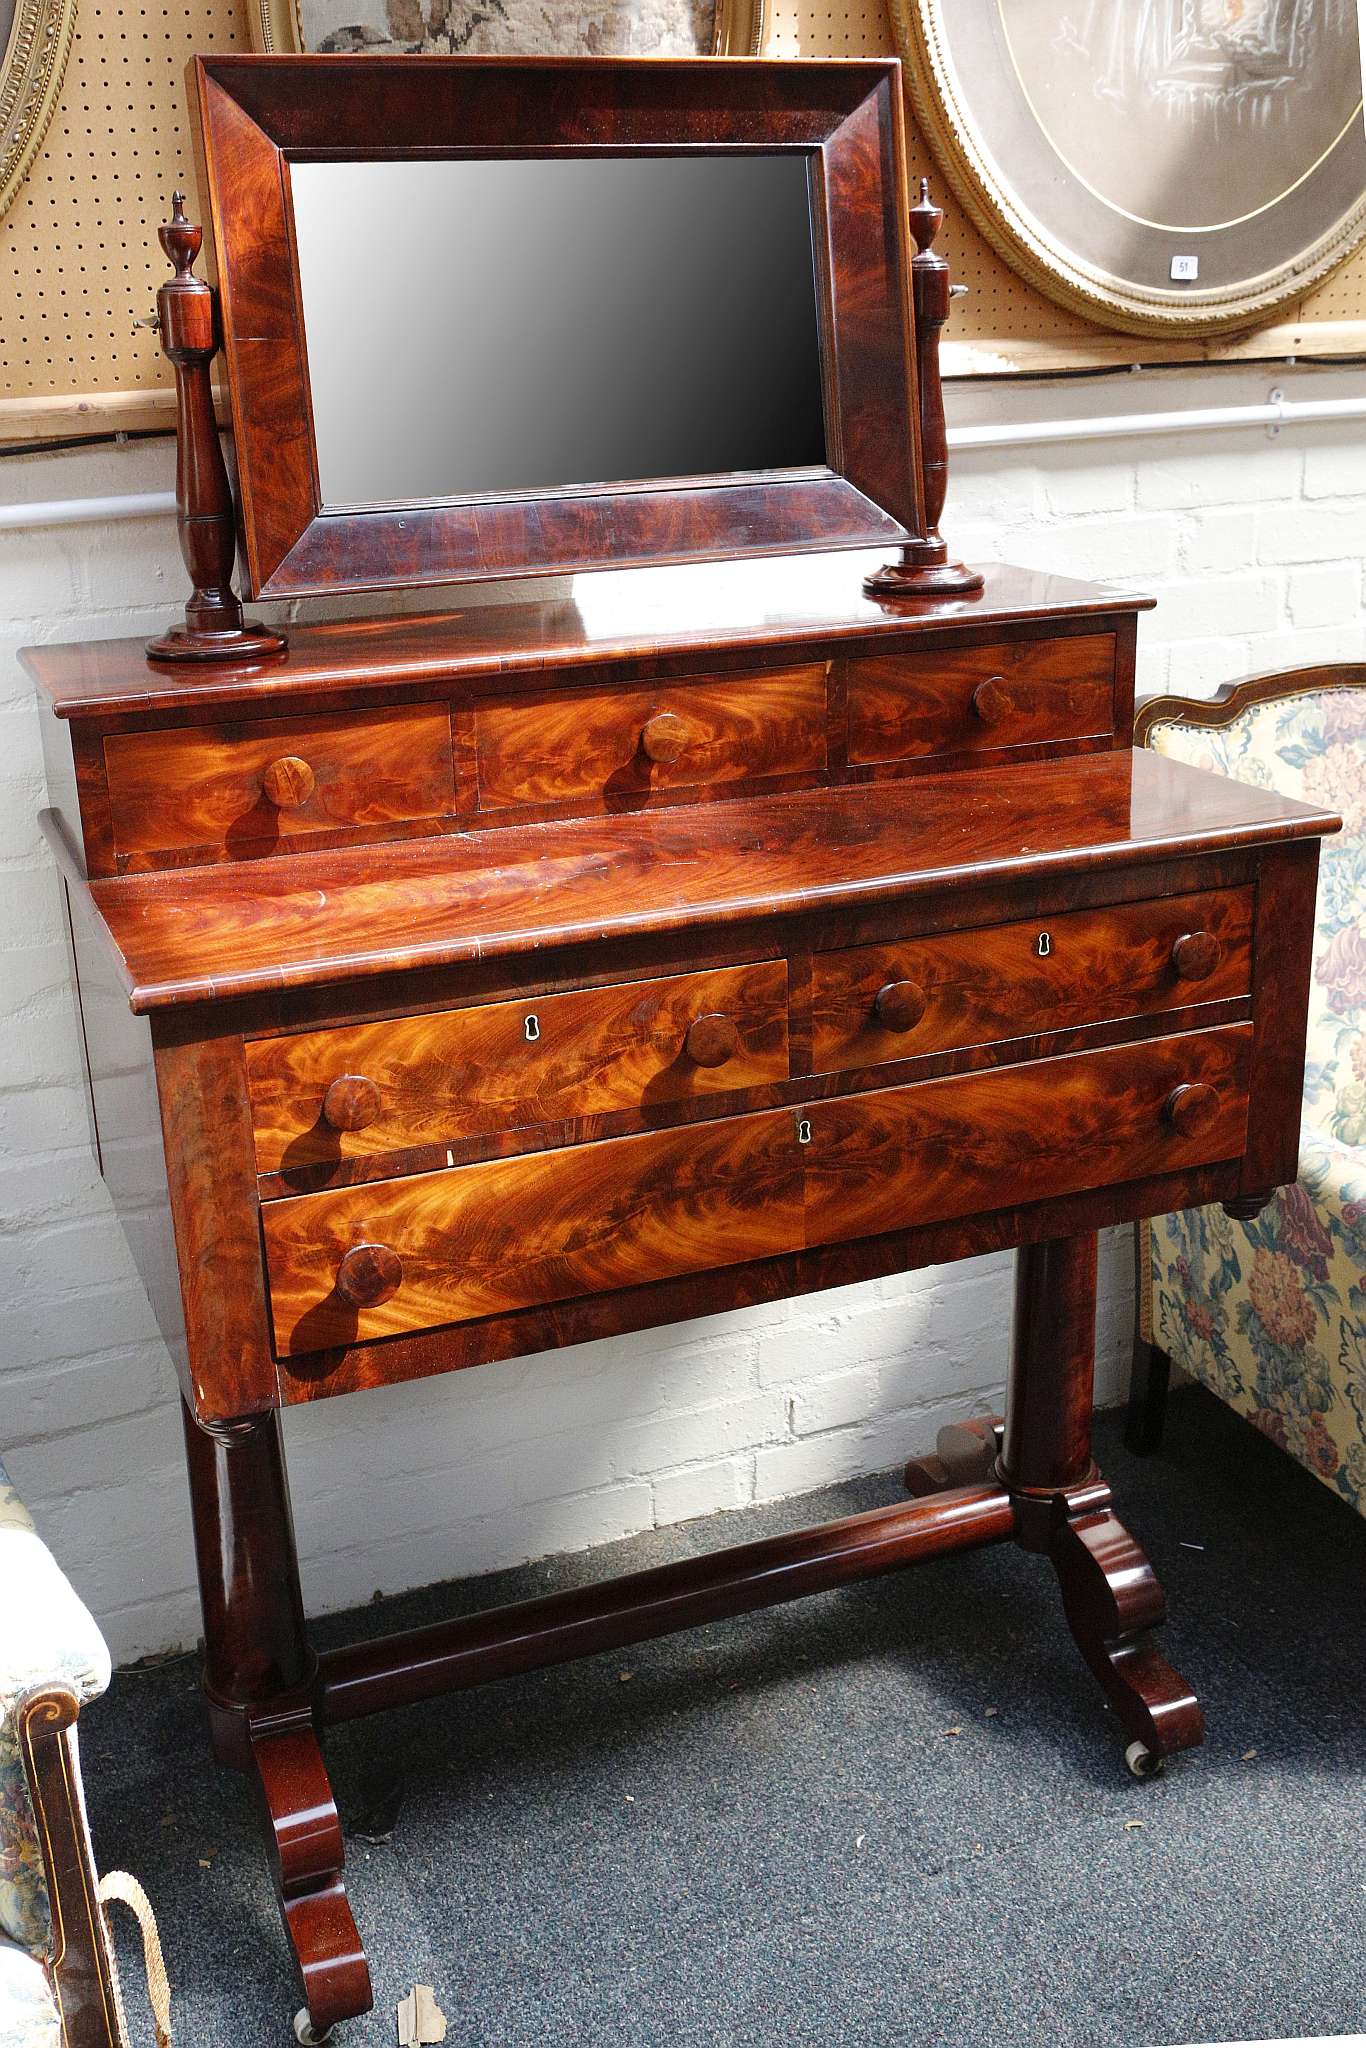 A 19th century French mahogany dressing chest, with articulated mirror over three drawers on